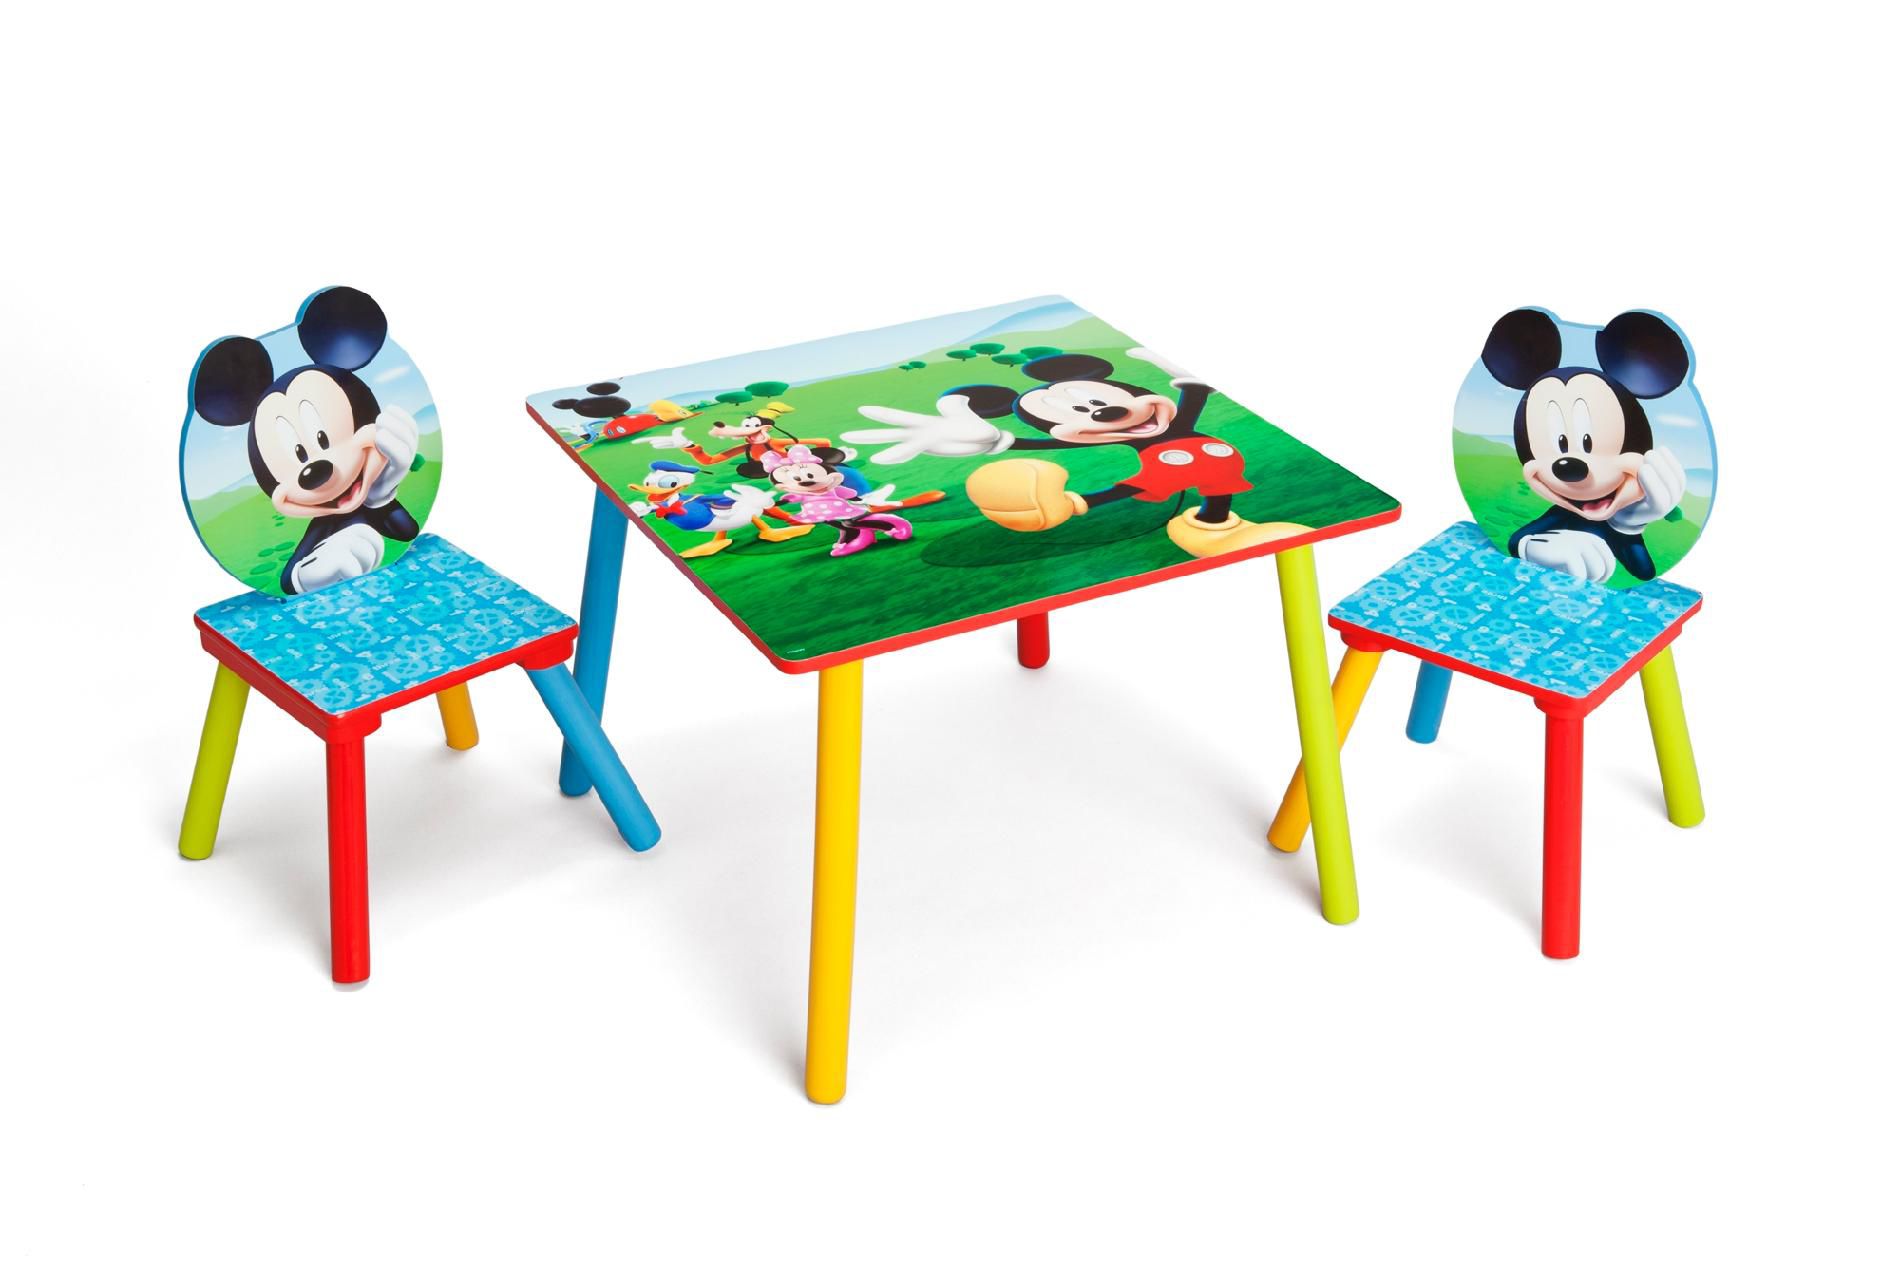 Folding Childrens Table /& Chair Set Mickey Mouse Activity Table Sets Includes 2 Kid Chairs with Non Skid Rubber Feet /& Padded Seats Sturdy Metal Construction